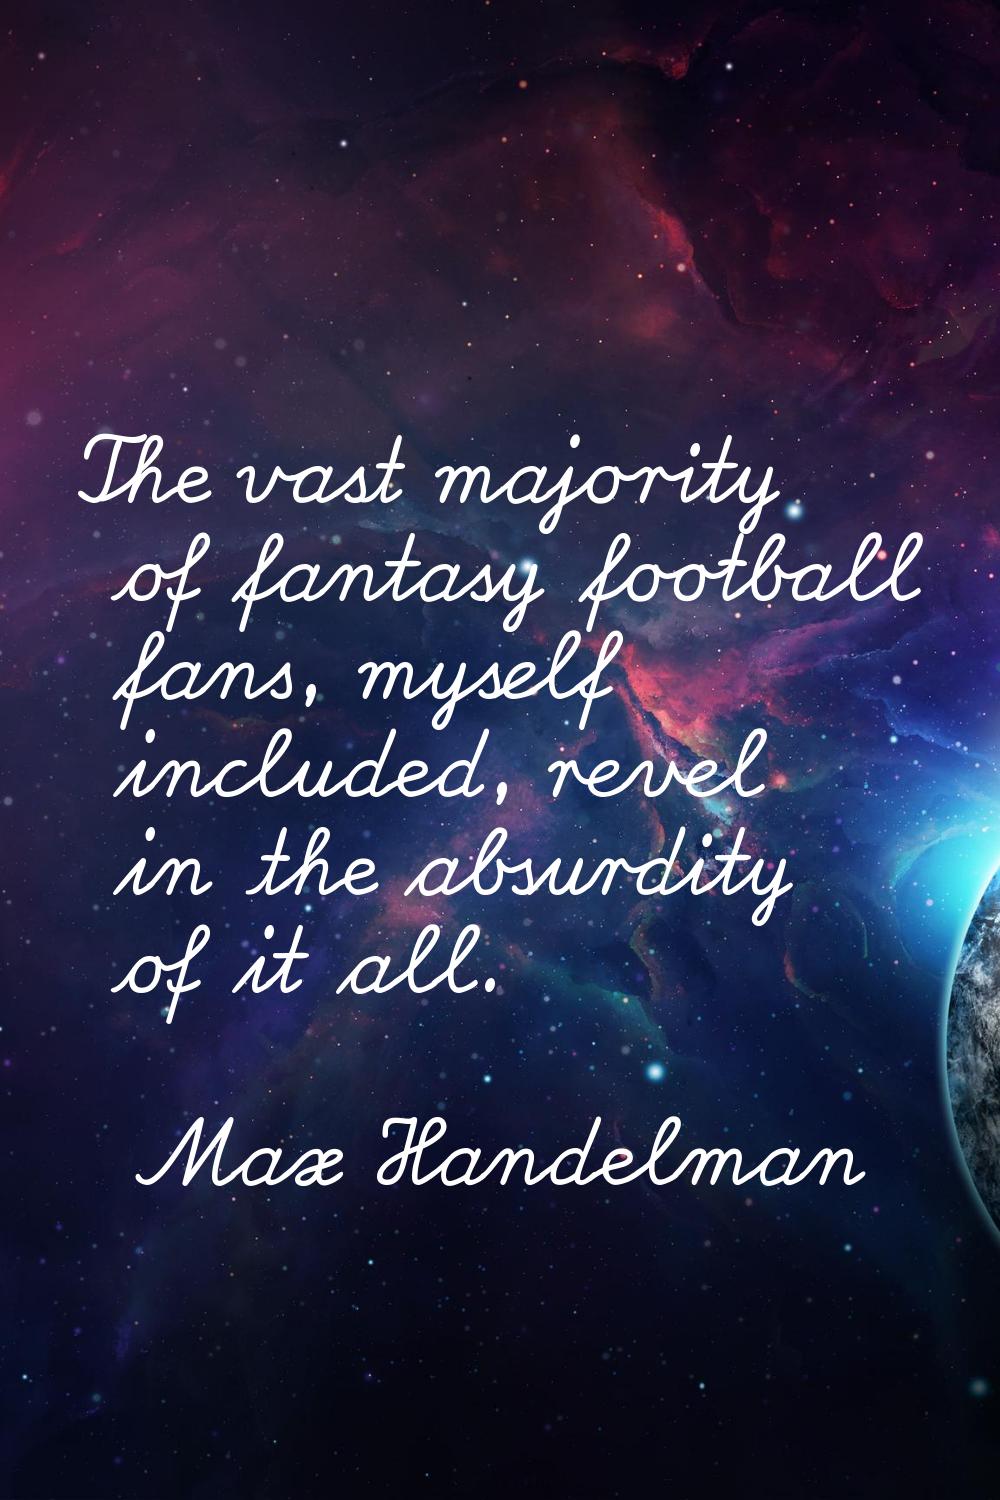 The vast majority of fantasy football fans, myself included, revel in the absurdity of it all.